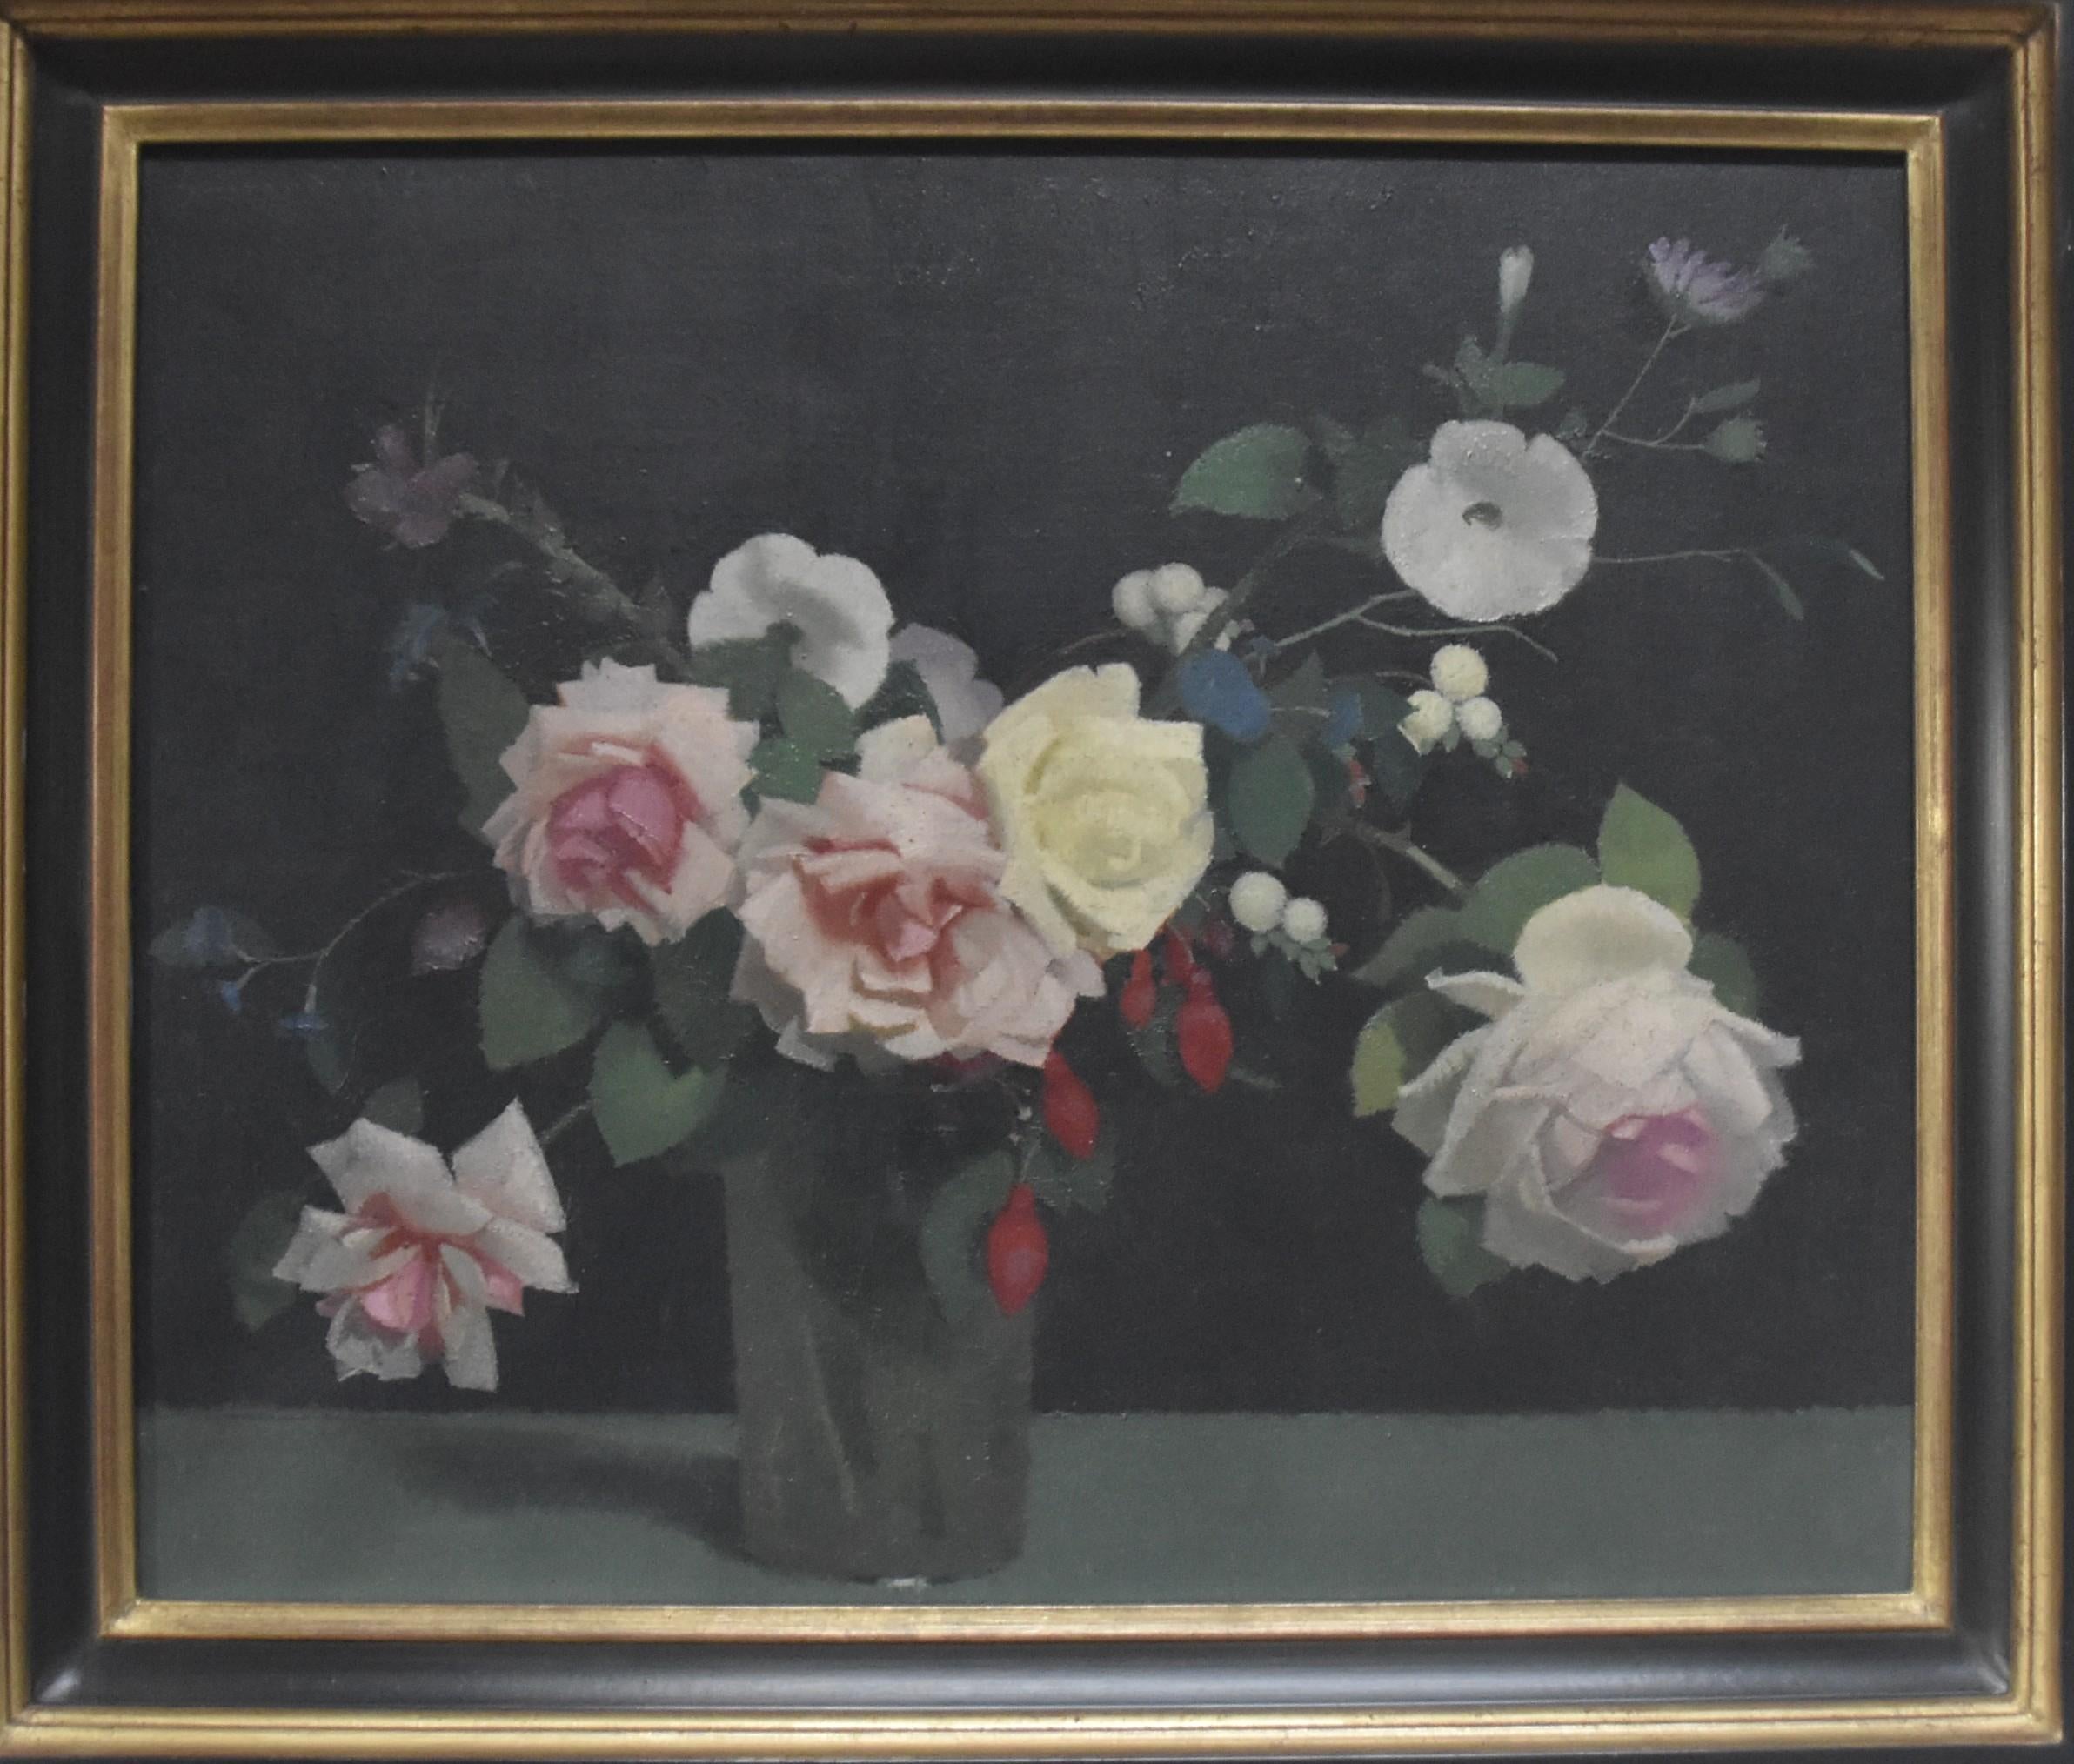 Lucien-Victor Guirand de Scevola (1871-1950) 
A Bunch of flowers 
Oil on on canvas
Signed upper left 
38 x 46 cm
In a nice modern frame : 53 x 61 cm

Lucien Victor Guirand de Scévola was particularly fond of painting flowers. His bouquets have also